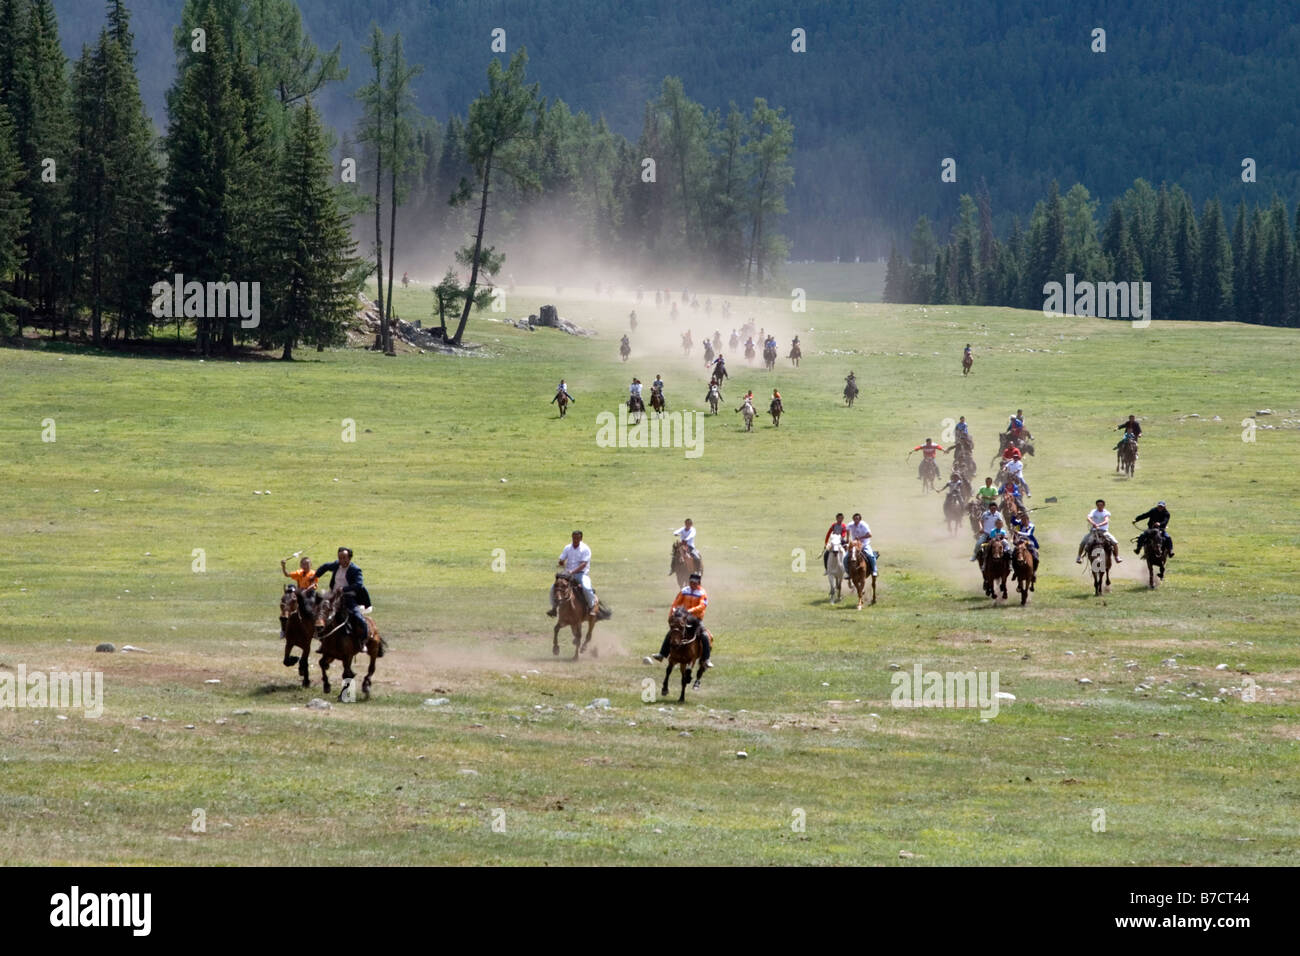 Horse racing during the Mongolian annual competition called Ao Bao Jie. Stock Photo